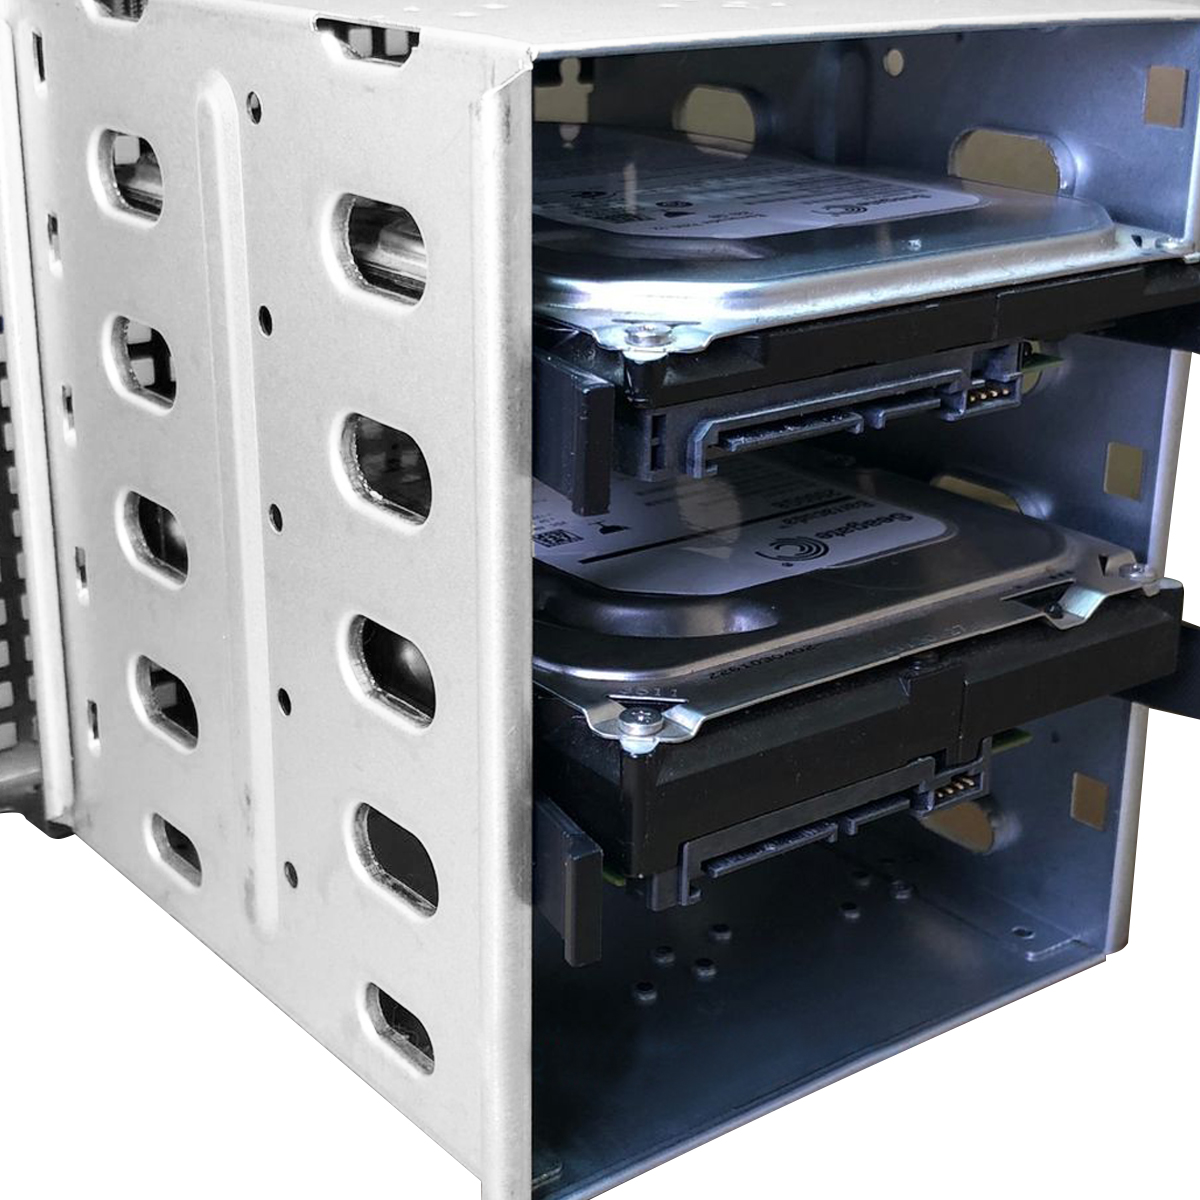 5.25" to 5x 3.5" SATA SAS HDD Cage Rack Hard Drive Tray Caddy Converter with Fan Space 55